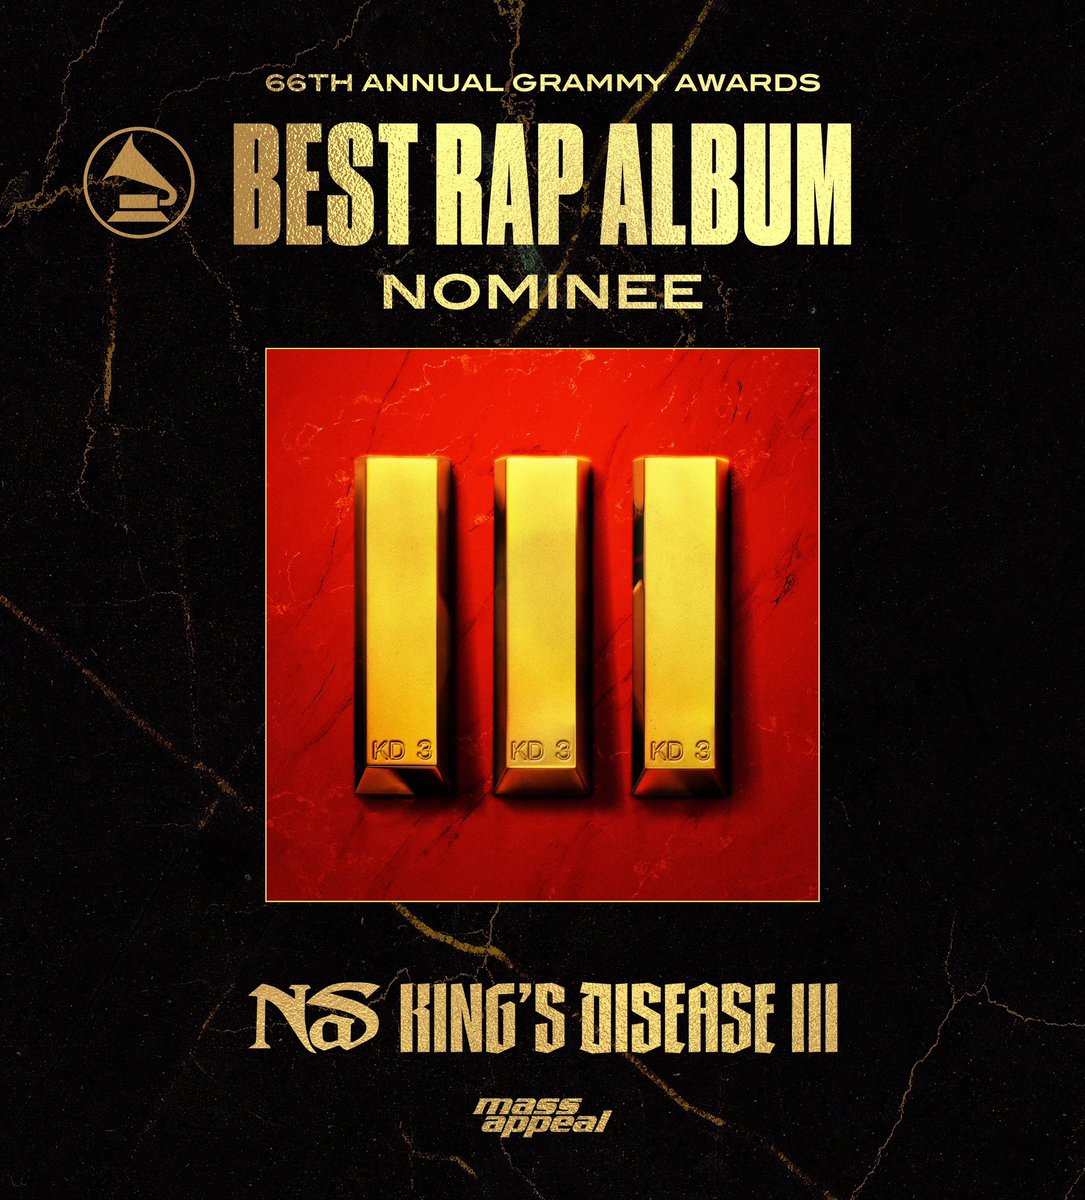 Congratulations to @Nas and @Hit_Boy on their Grammy nomination for Best Rap Album of the Year!